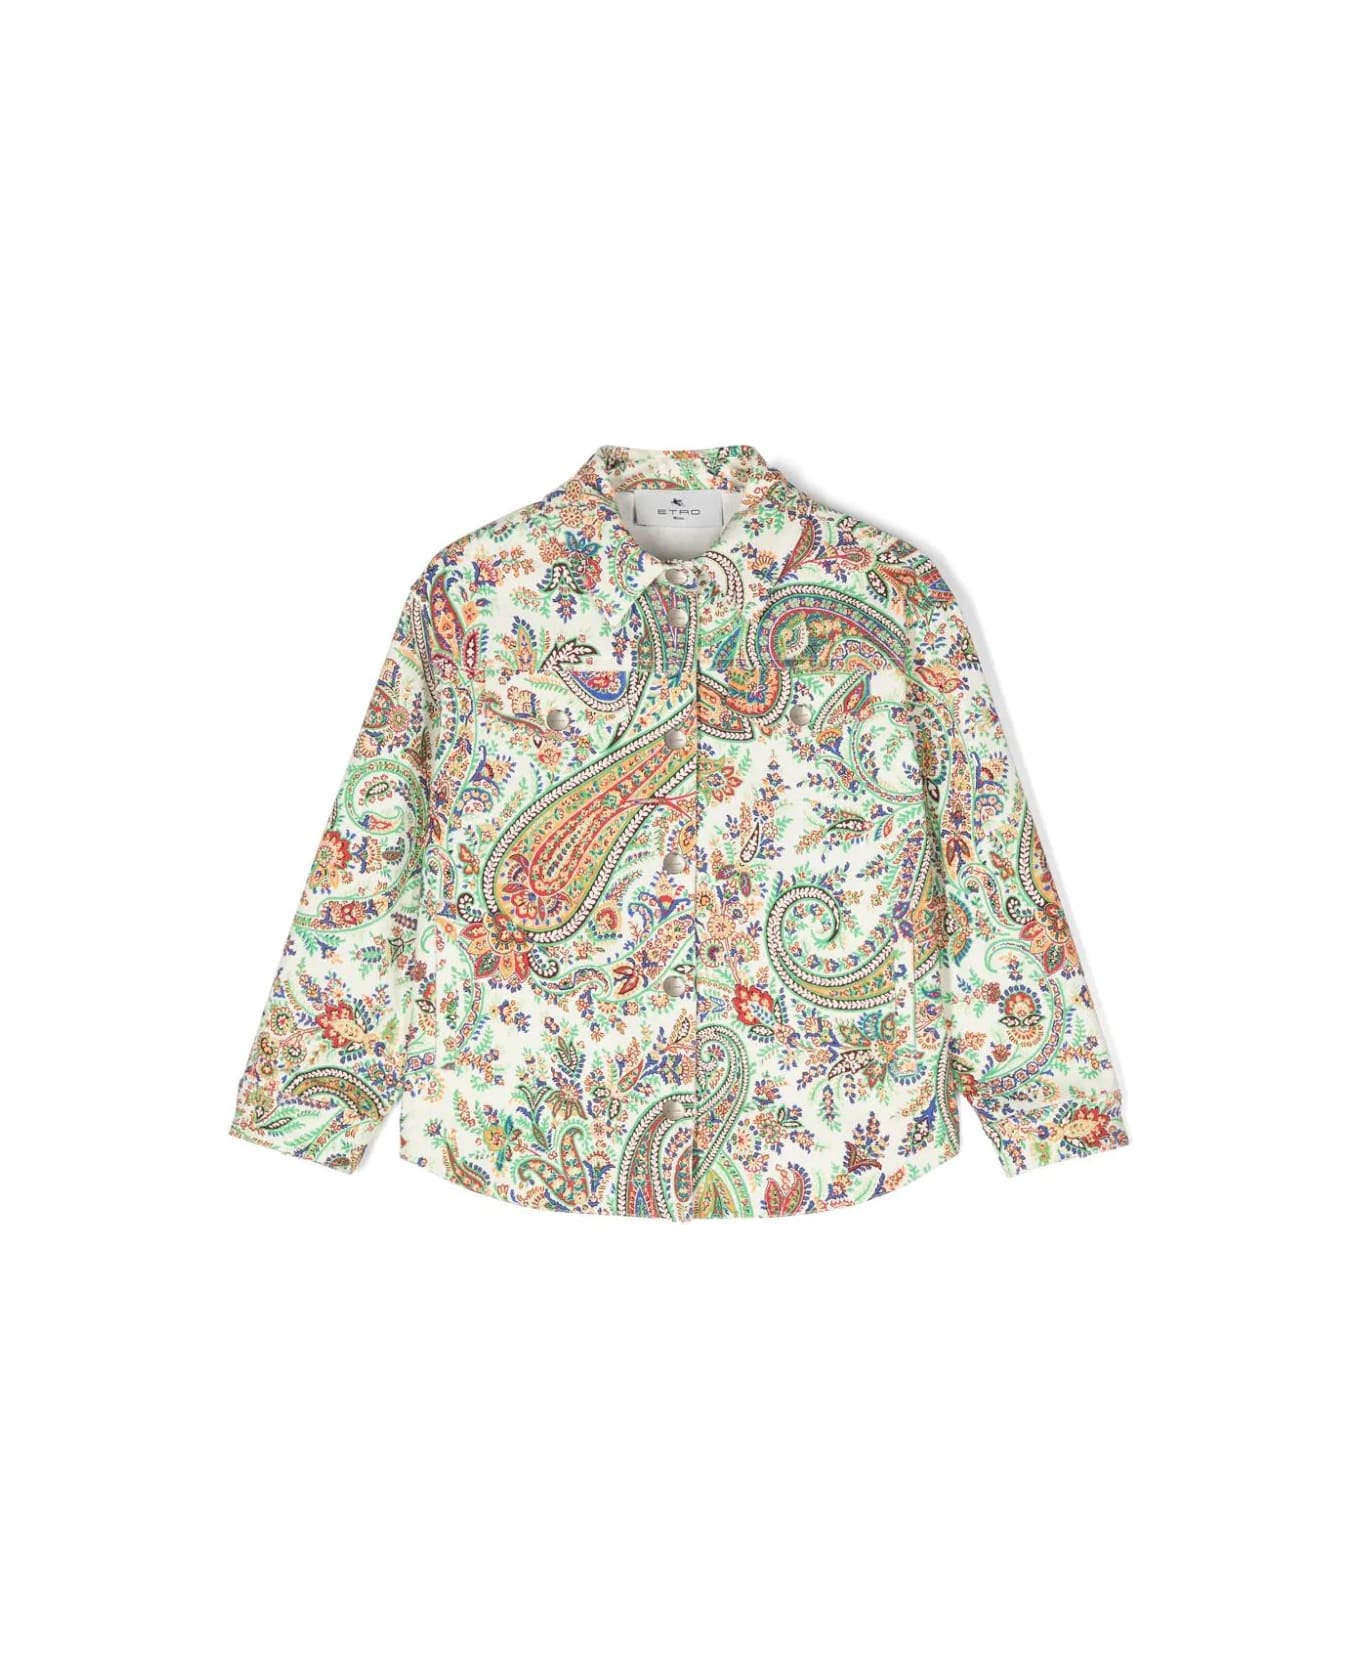 Etro Giacca Denim Con Stampa Paisley - ivory/colourful